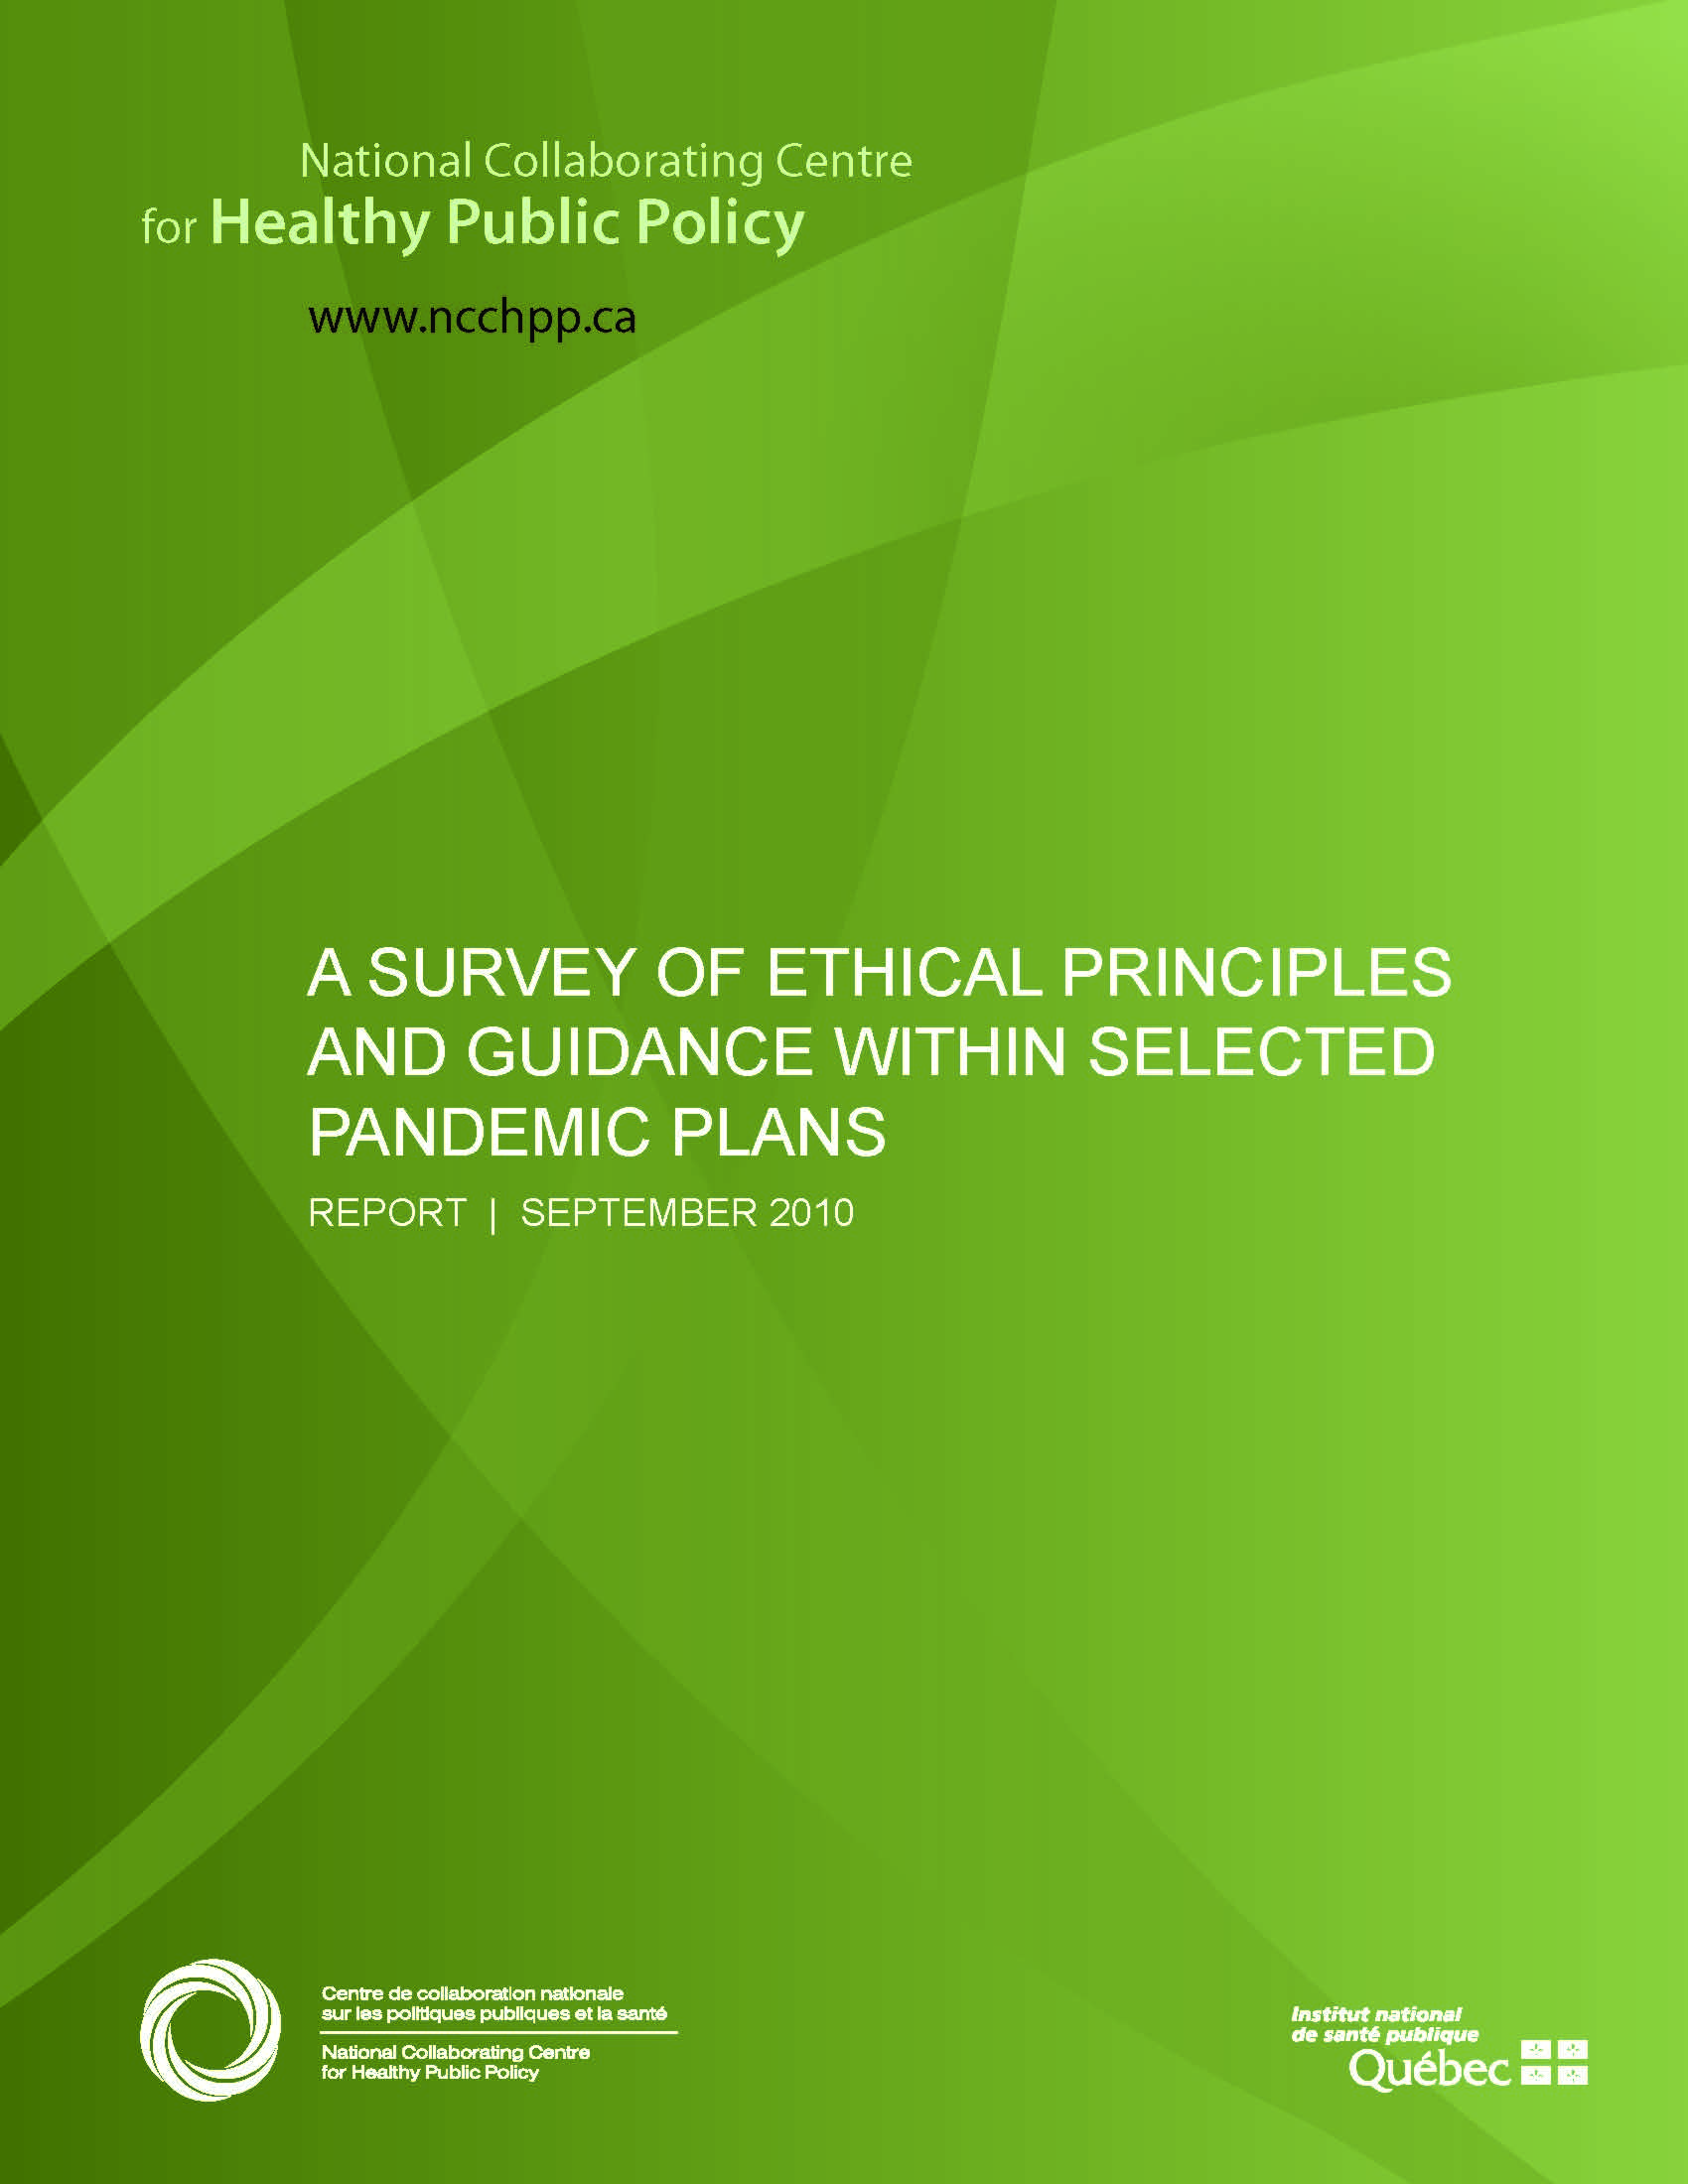 A Survey of Ethical Principles and Guidance Within Selected Pandemic Plans